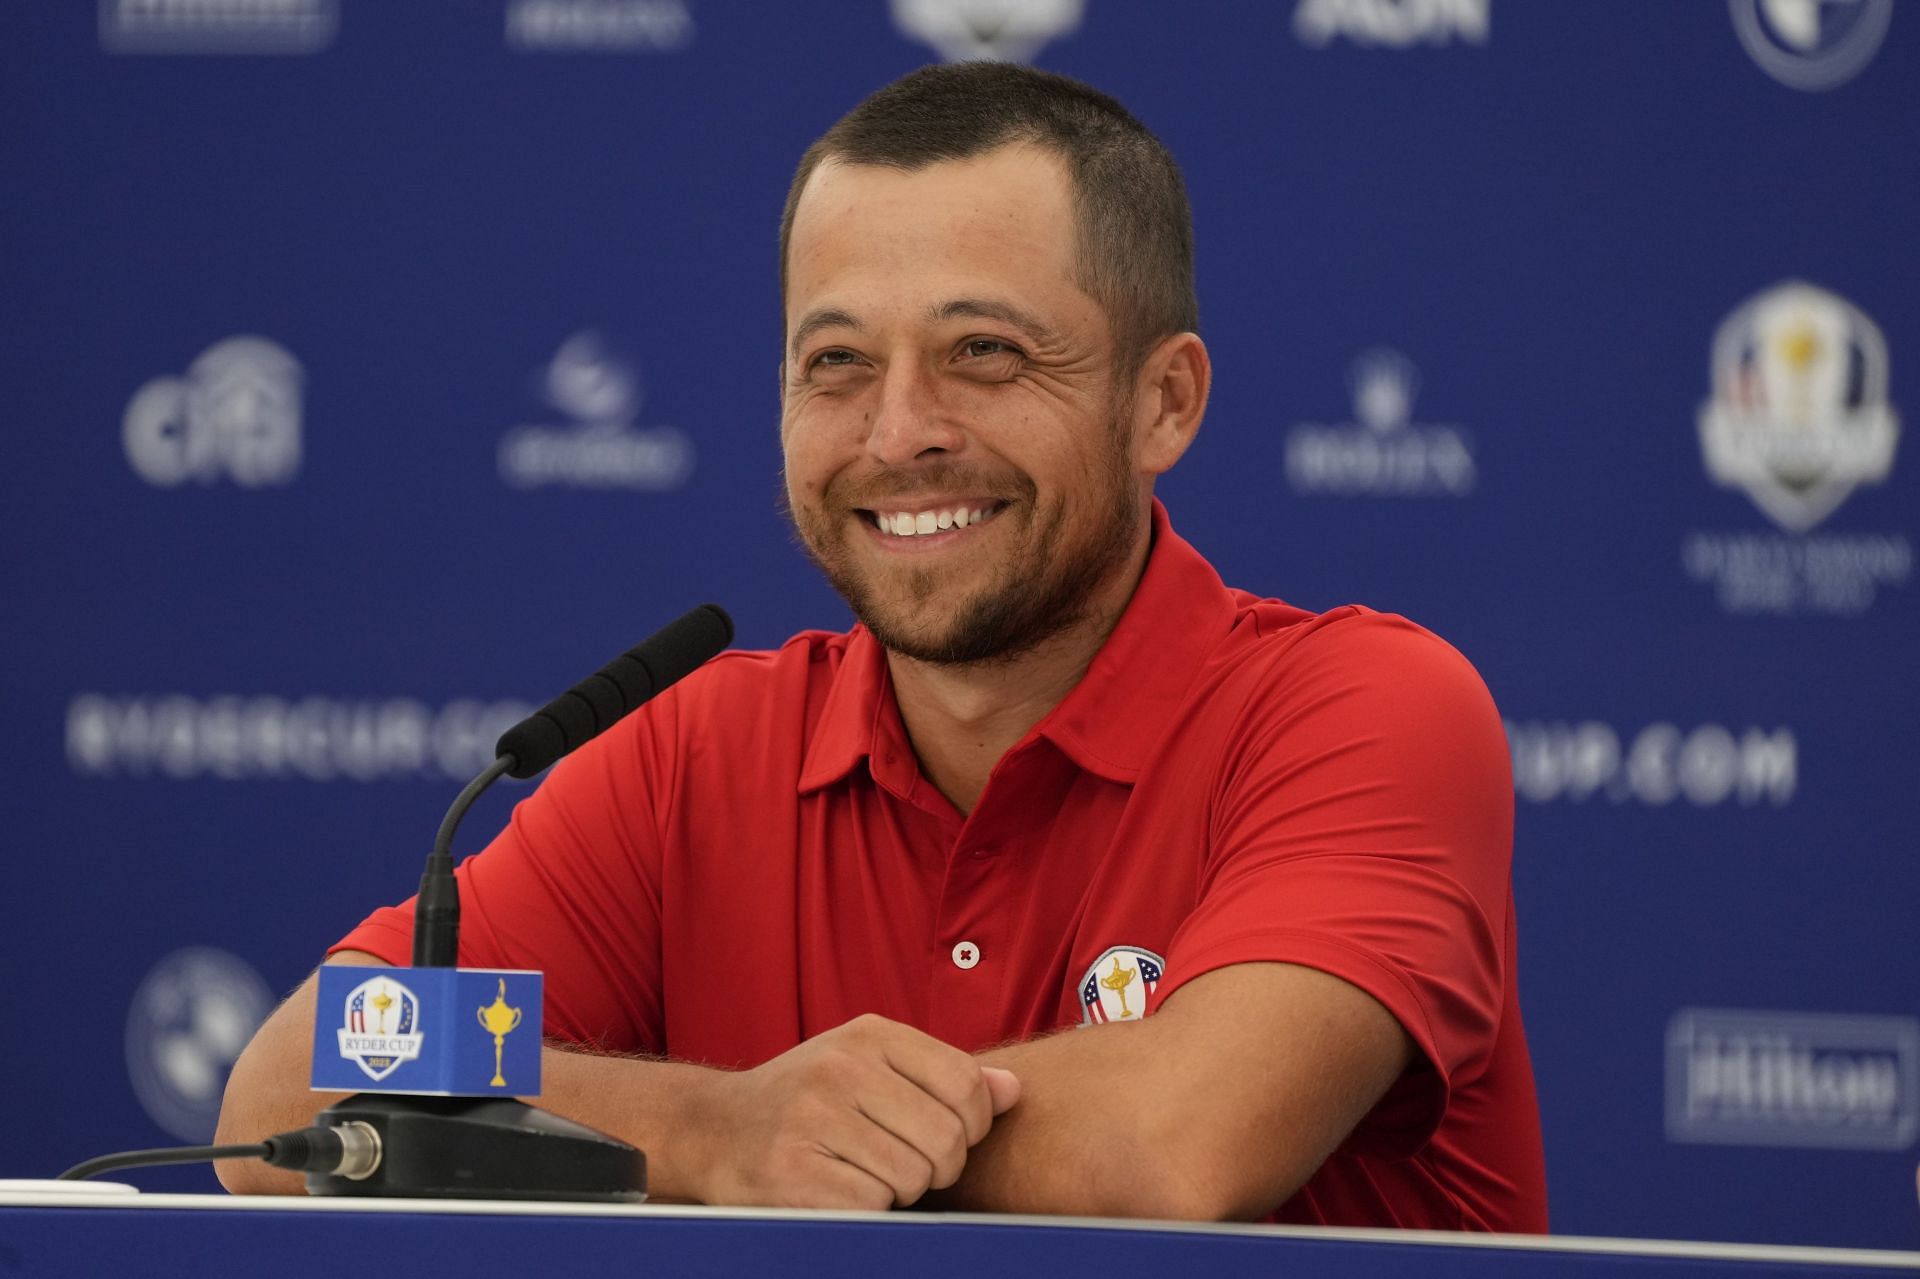 Italy Ryder Cup Golf